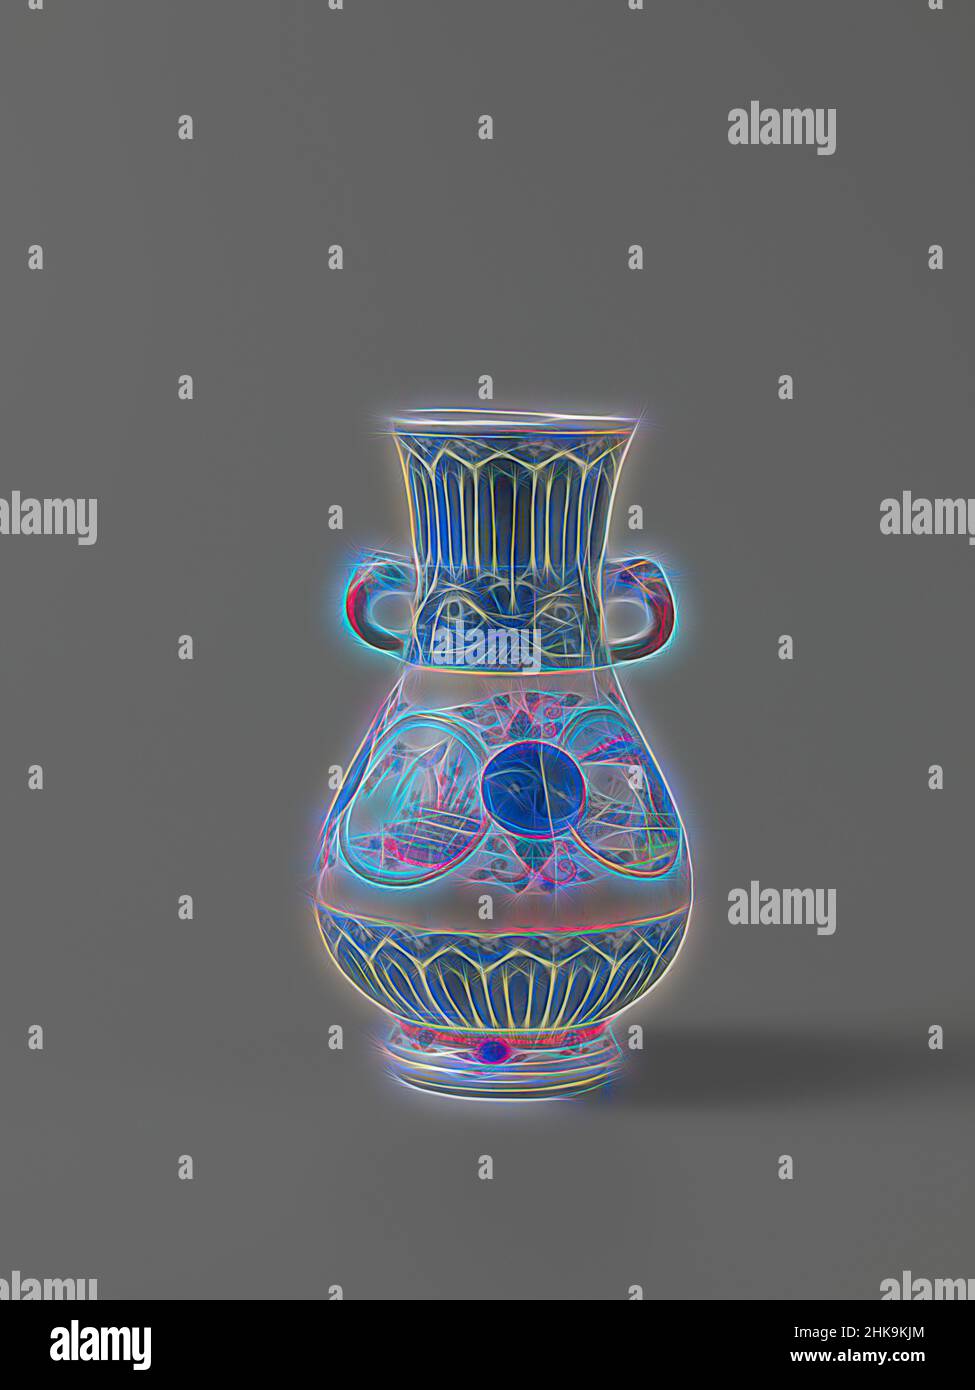 Inspired by Pear-shaped vase with ornamental borders and landscapes in medallions, Pear-shaped vase of porcelain with a wide, slightly spreading neck and two modeled ears in the shape of animal heads. Painted in underglaze blue and on the glaze blue, red, green, yellow, black and gold. Decorated in, Reimagined by Artotop. Classic art reinvented with a modern twist. Design of warm cheerful glowing of brightness and light ray radiance. Photography inspired by surrealism and futurism, embracing dynamic energy of modern technology, movement, speed and revolutionize culture Stock Photo